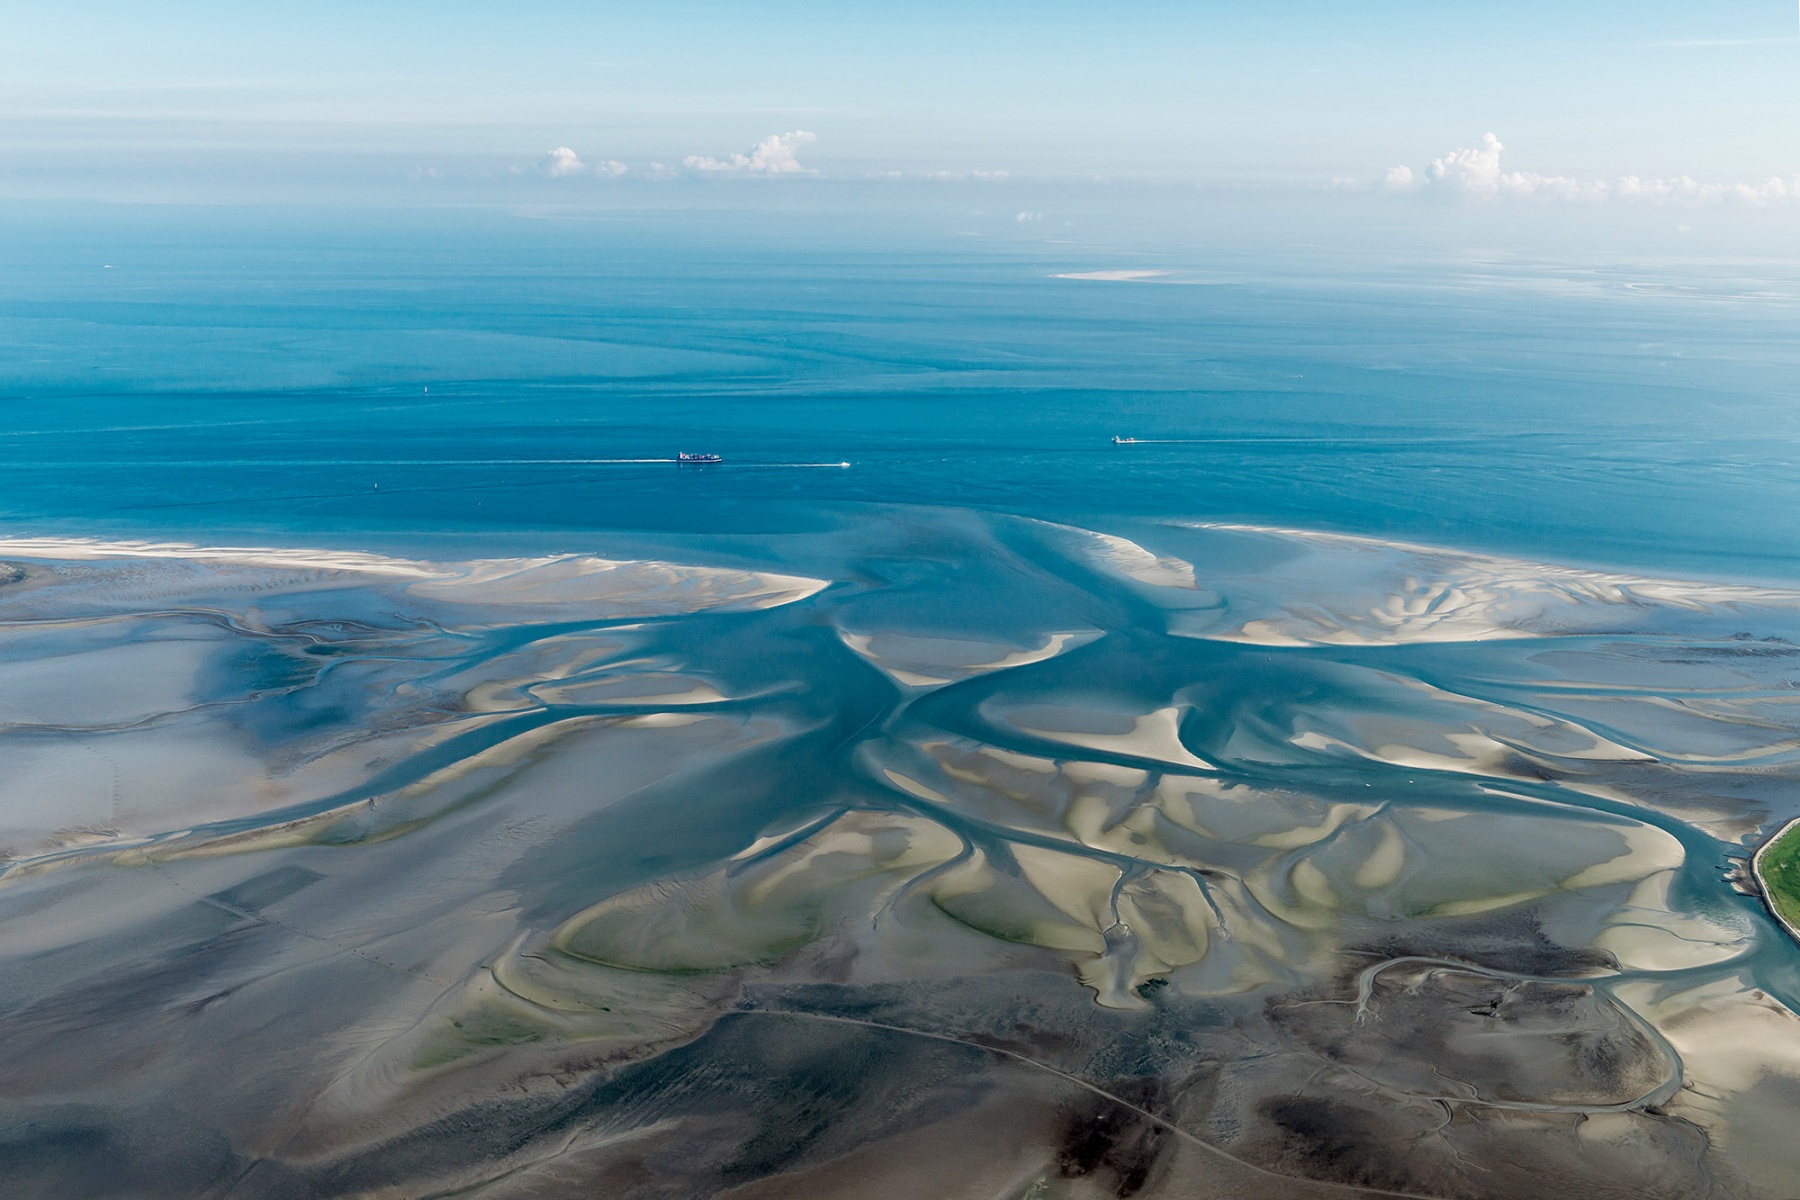 Aerial view of Scharhörn Nigehörn. This is a bird sanctuary. You can clearly see the seabed. © Martin Elsen